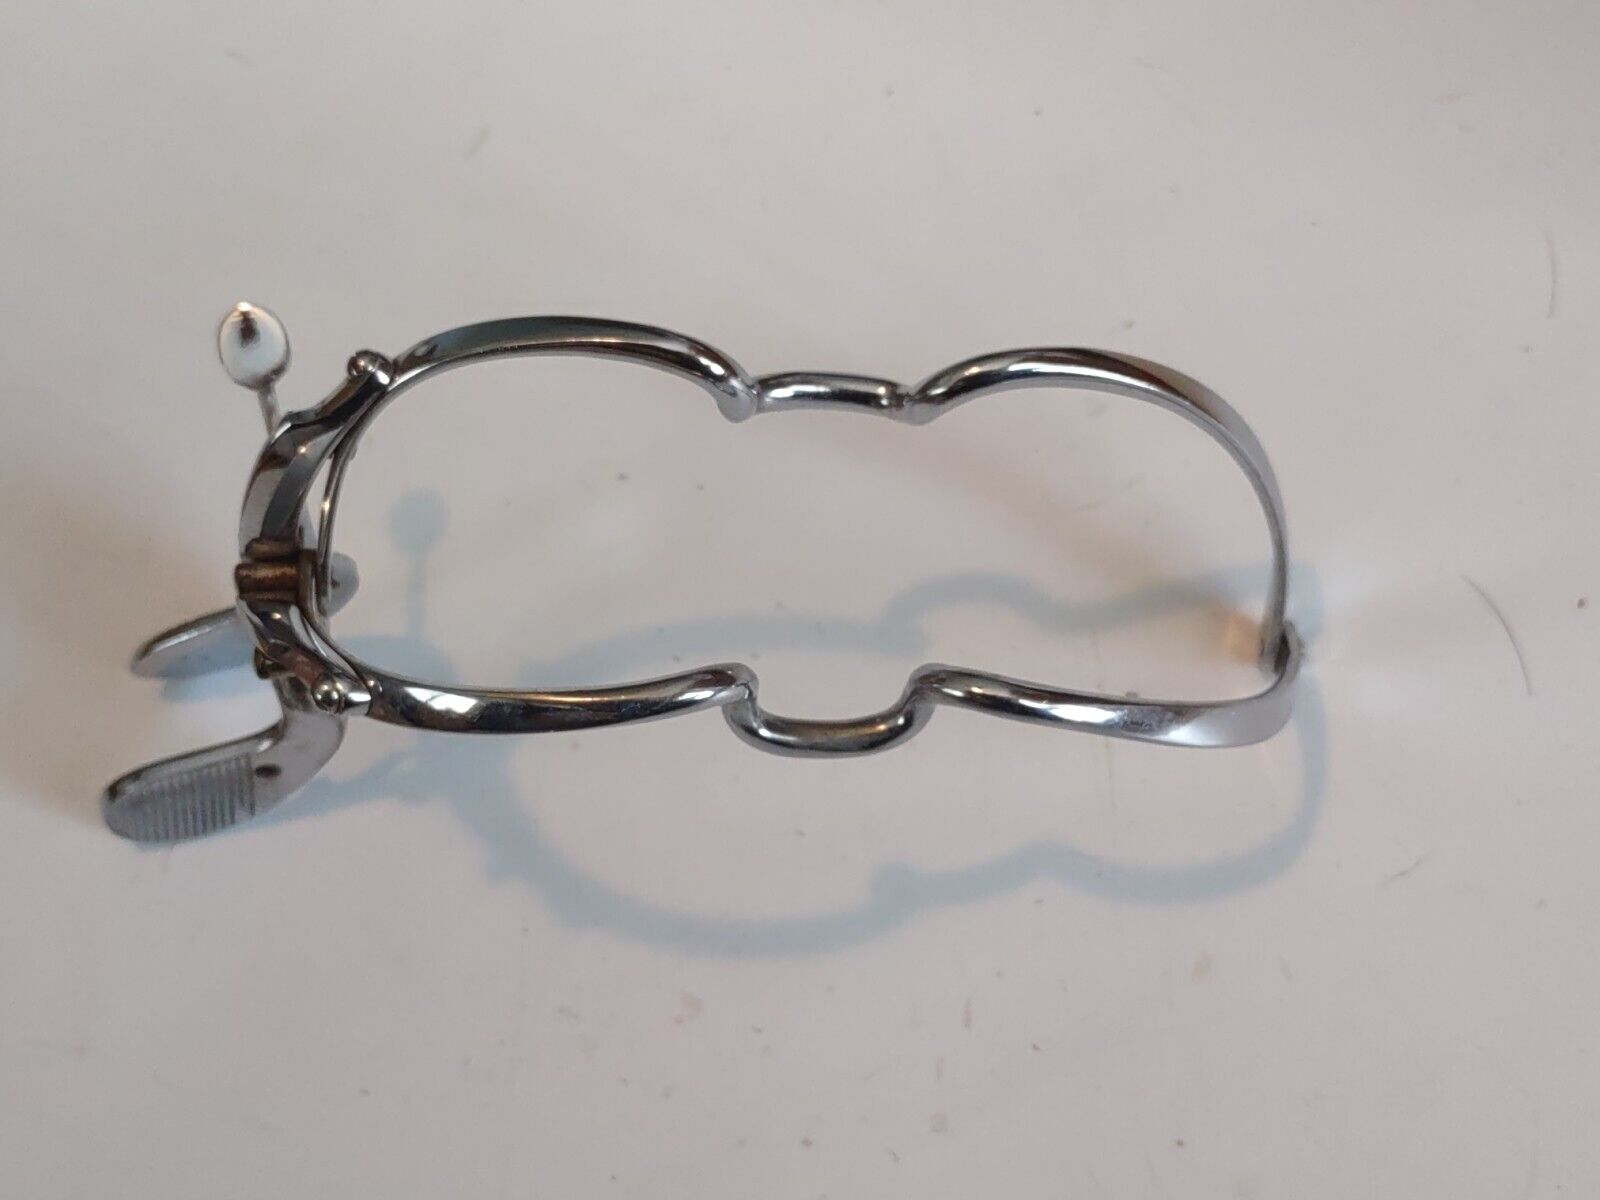 Medical Mouth Gag, Mouth Spreader, Vintage Medical Style, Oddities, Curiosities